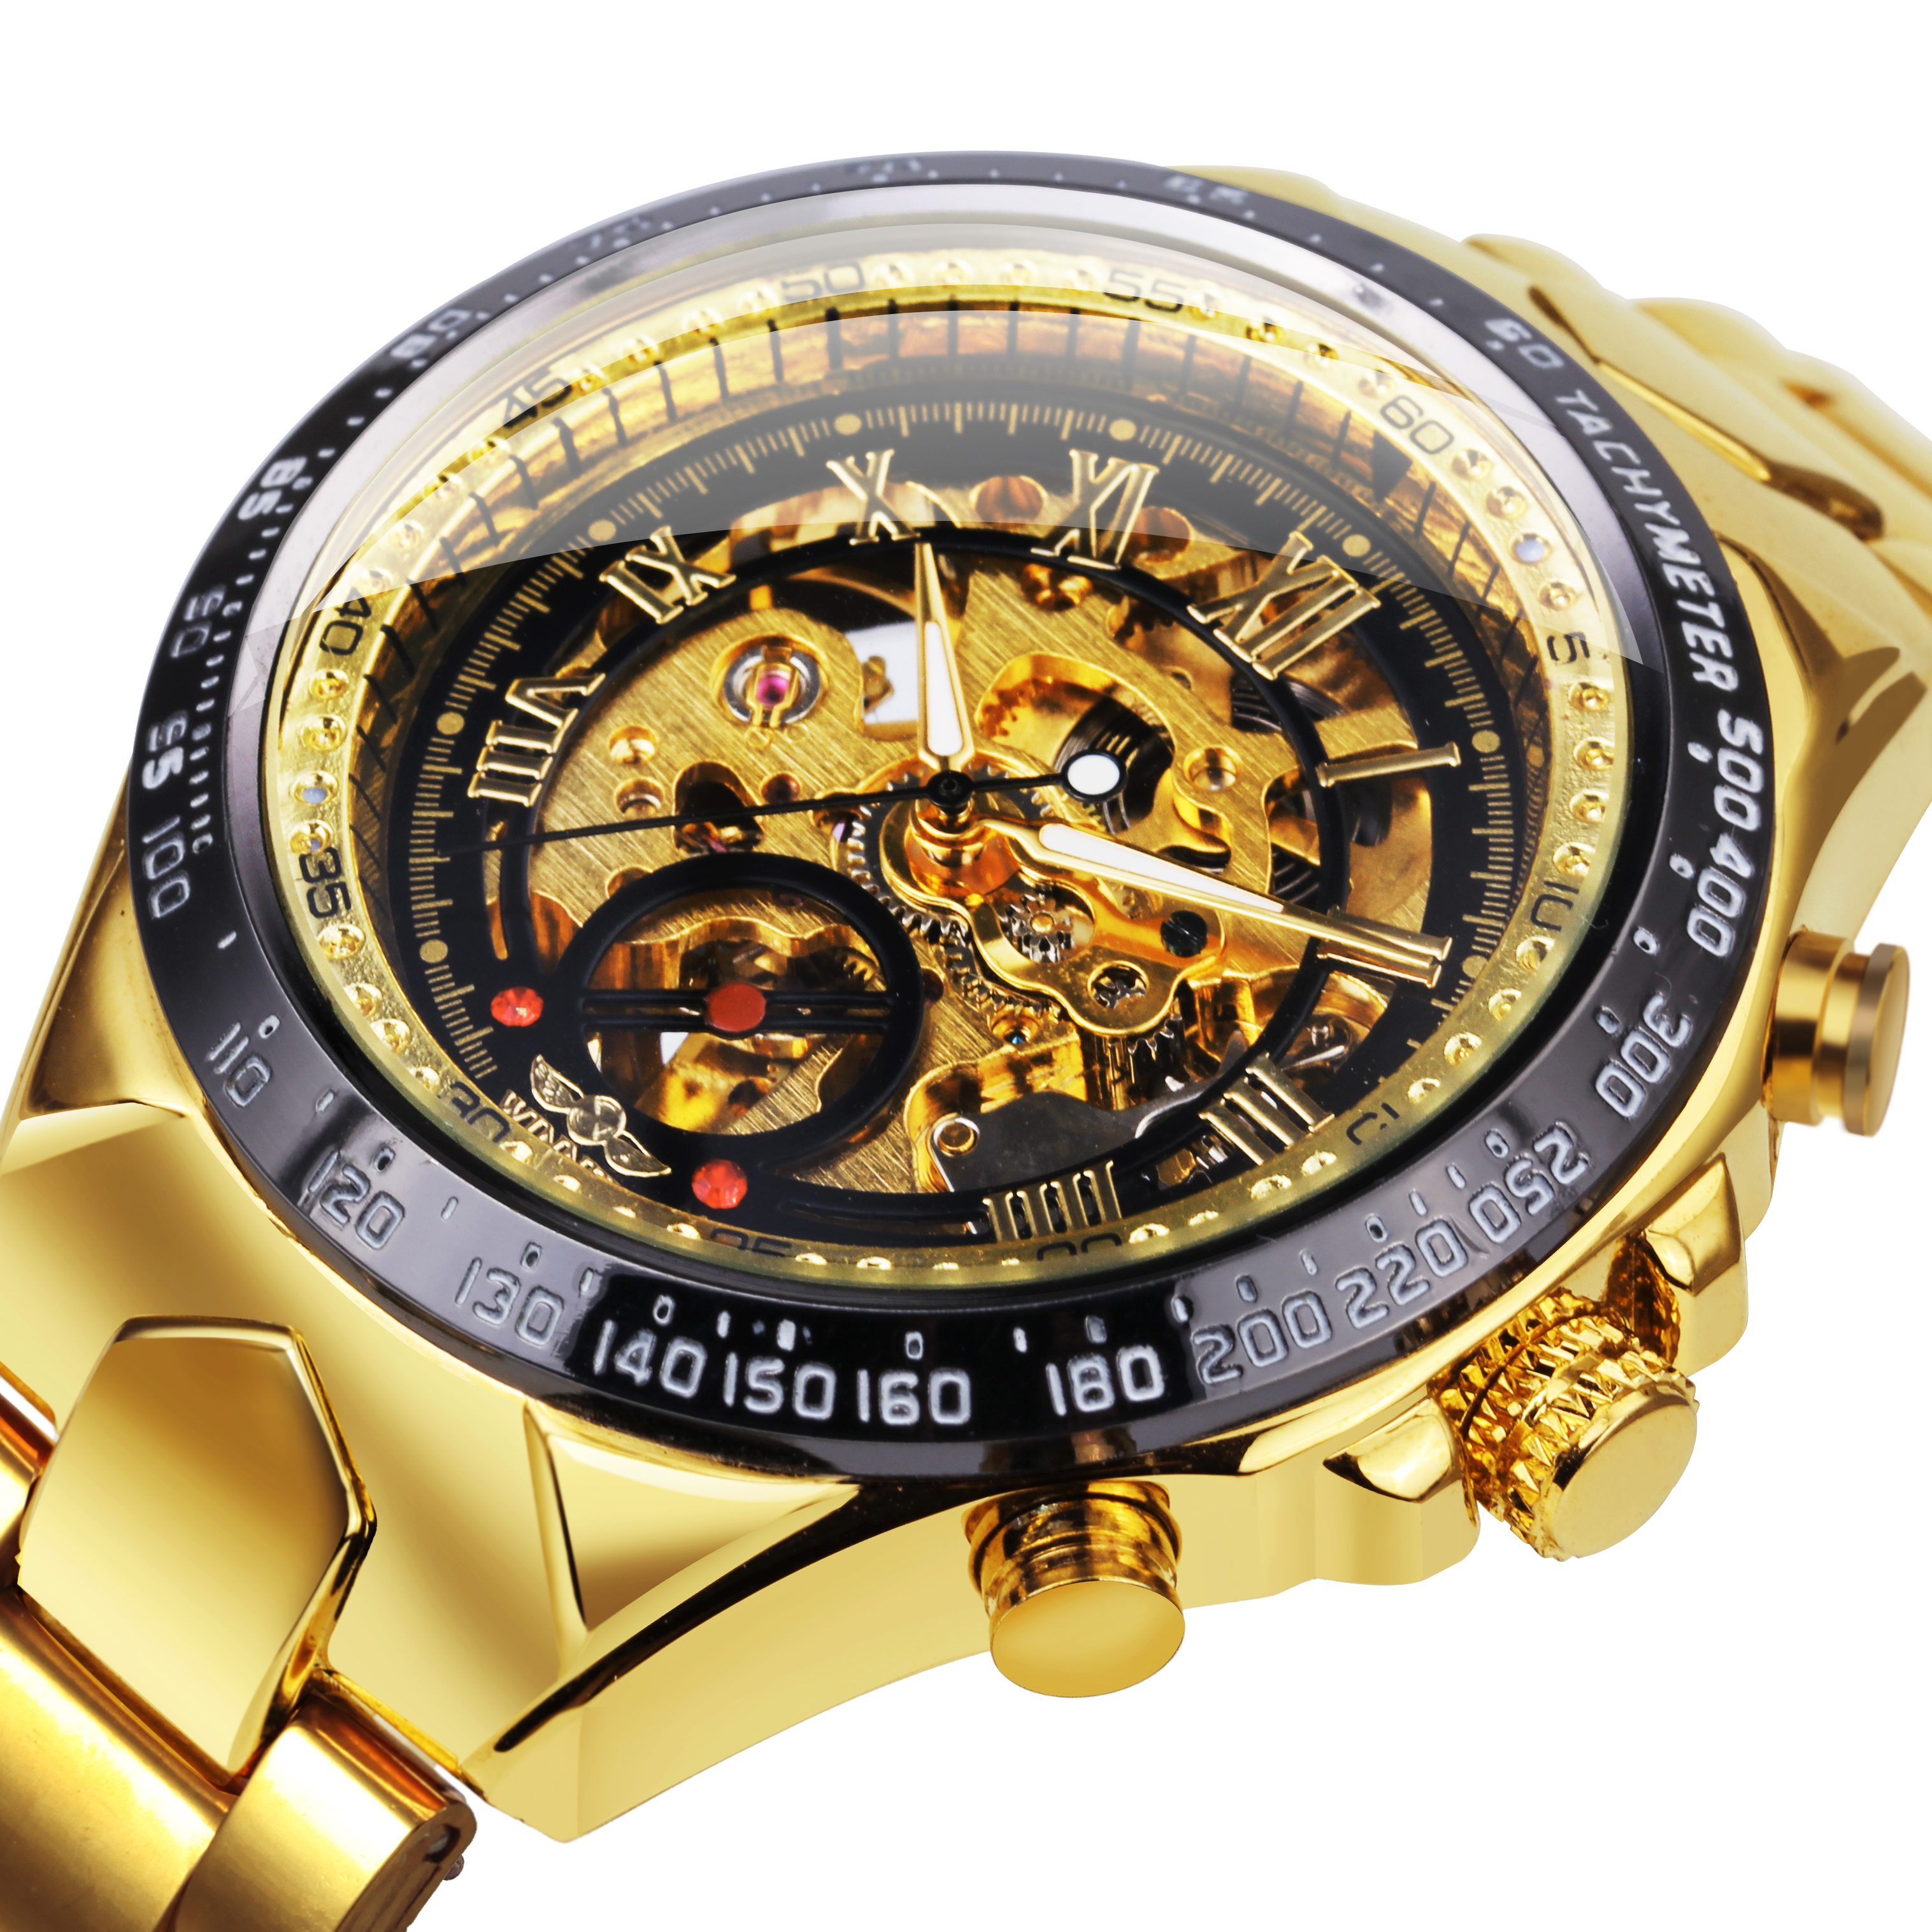 WINNER Automatic Mechanical Wristwatch Men Gold Male Top Luxury Brand Skeleton Watch Full Stainless Steel Big reloj hombre - Price history & Review | AliExpress Seller - Time Master | Alitools.io